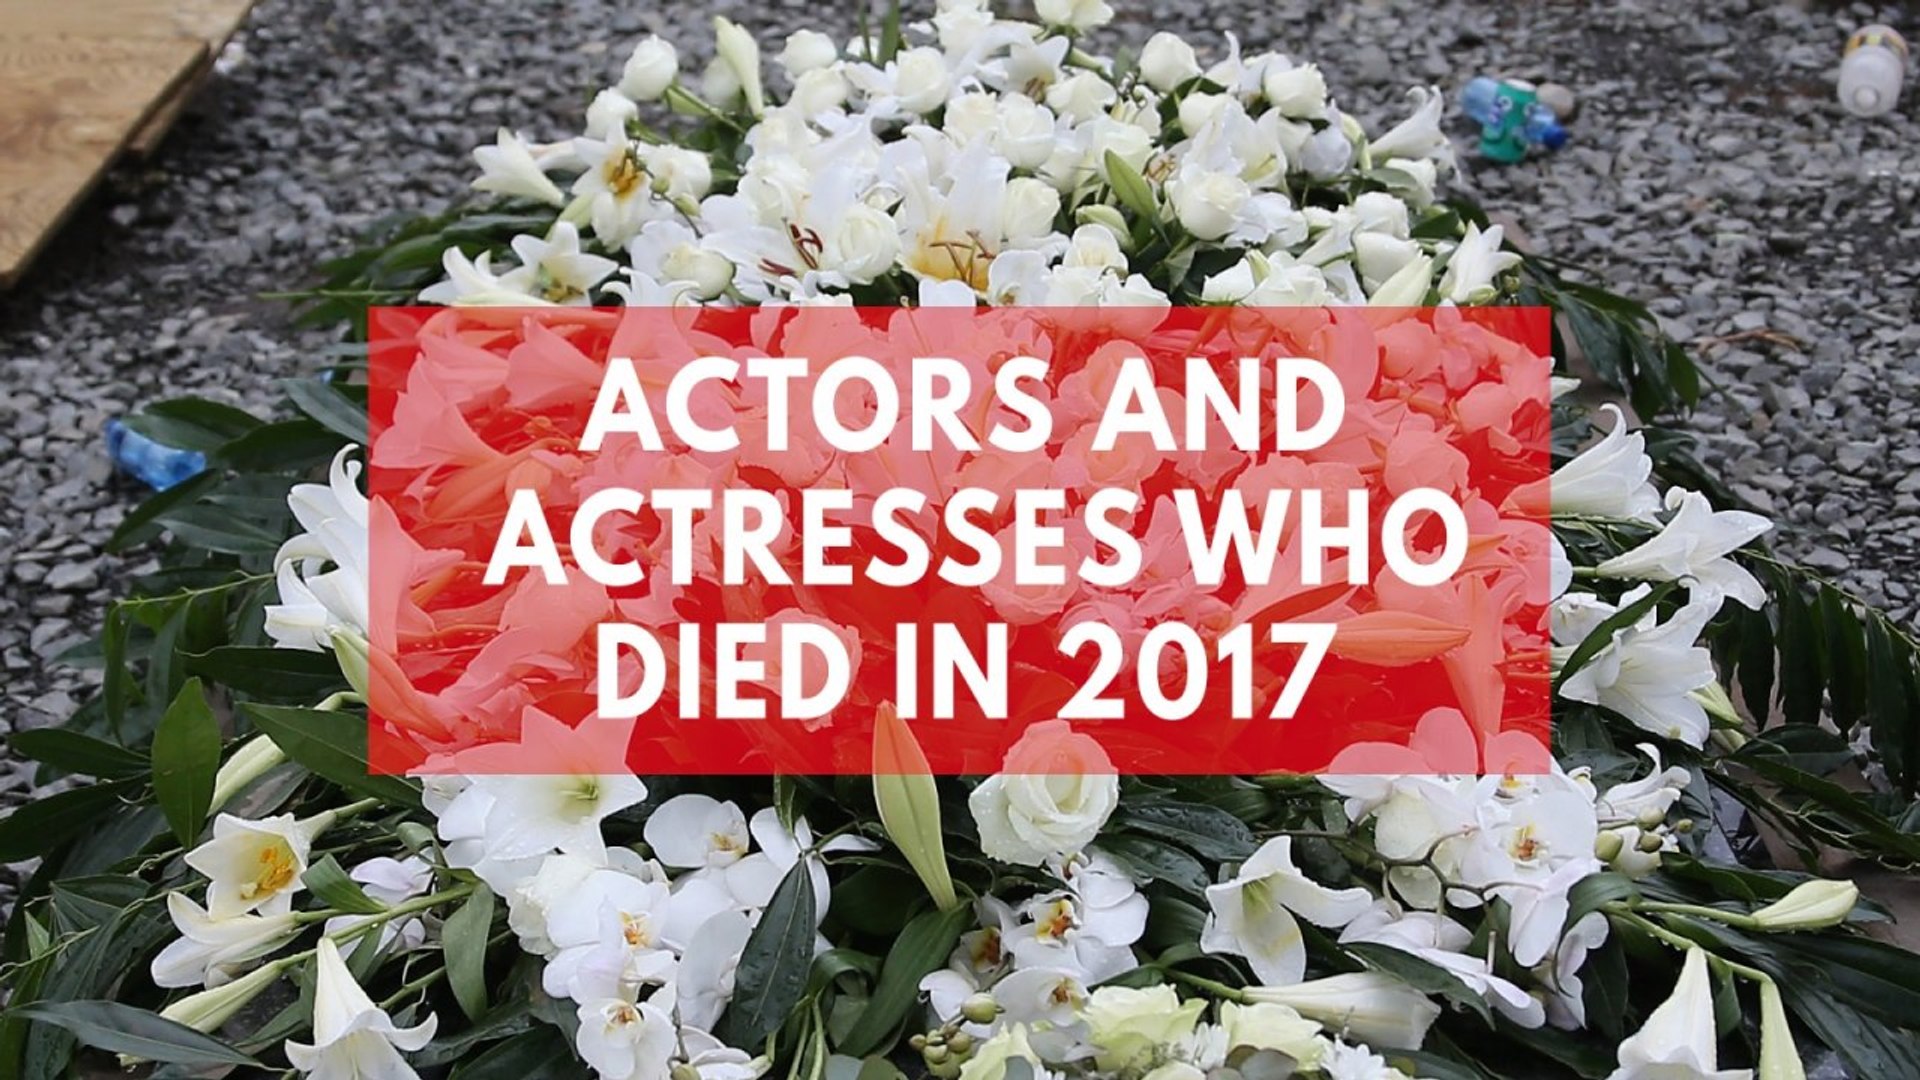 Actors and actresses who died in 2017